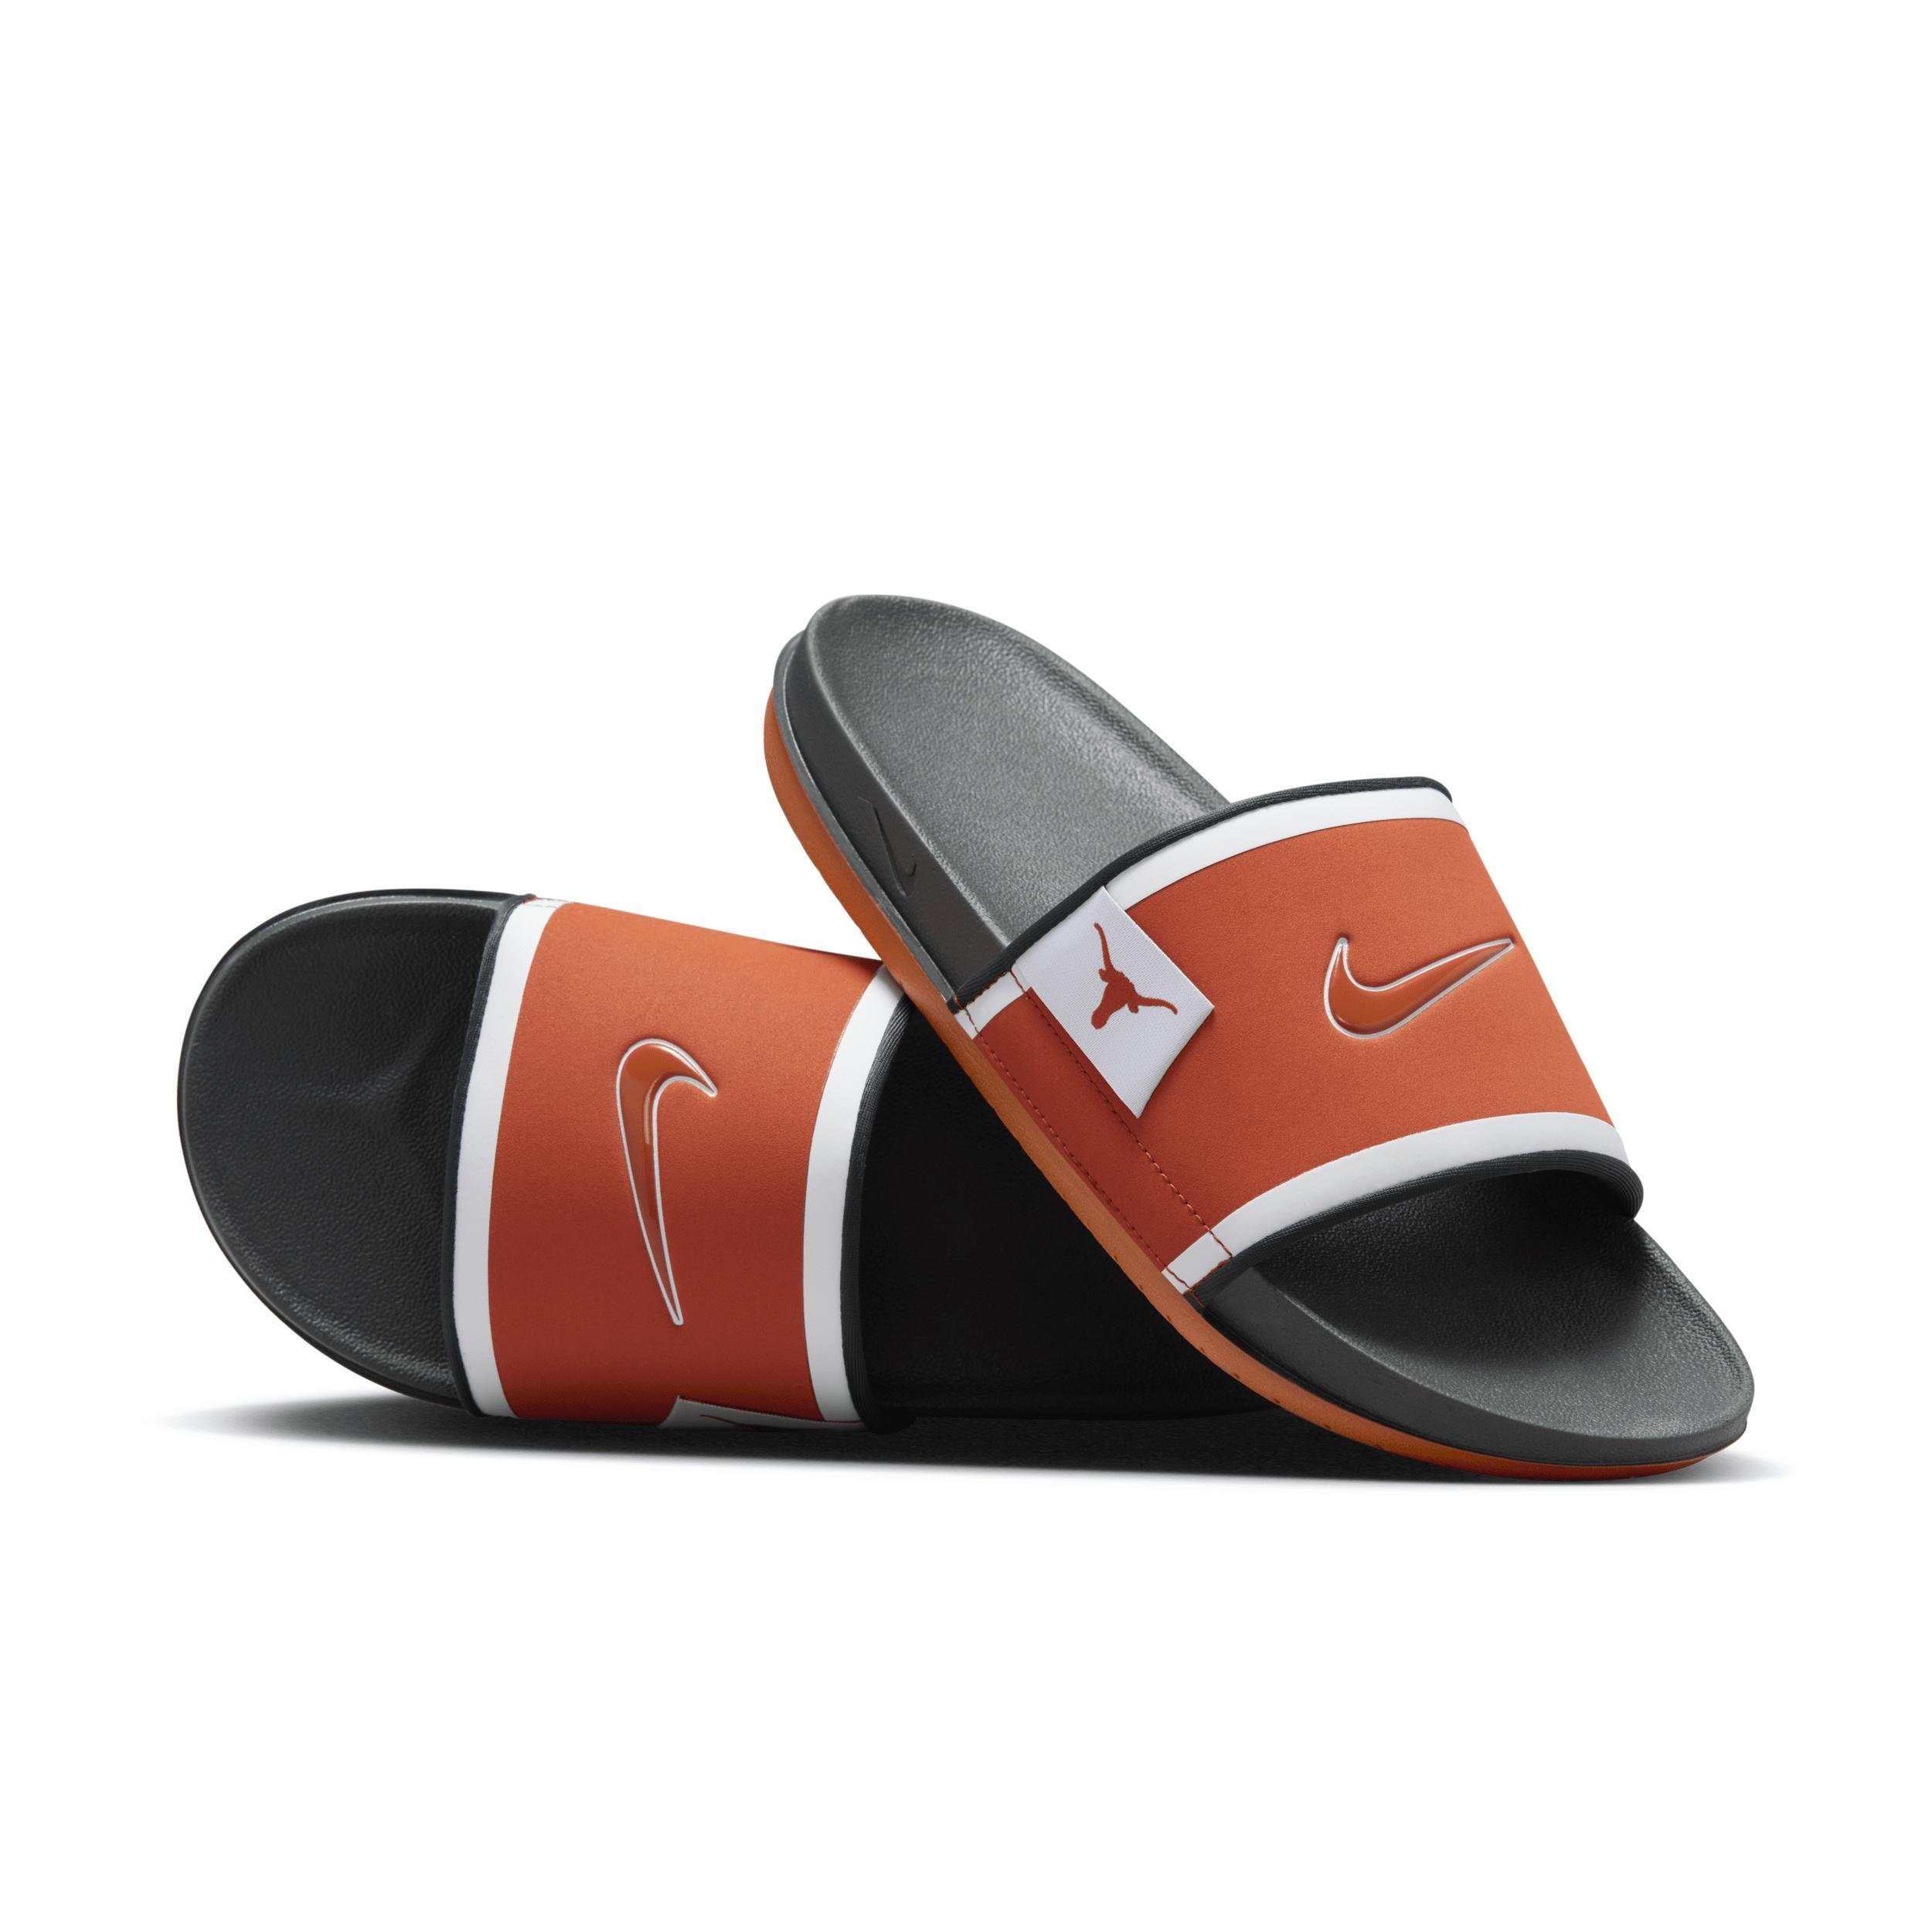 Nike Men's College Offcourt (Texas) Slides by NIKE